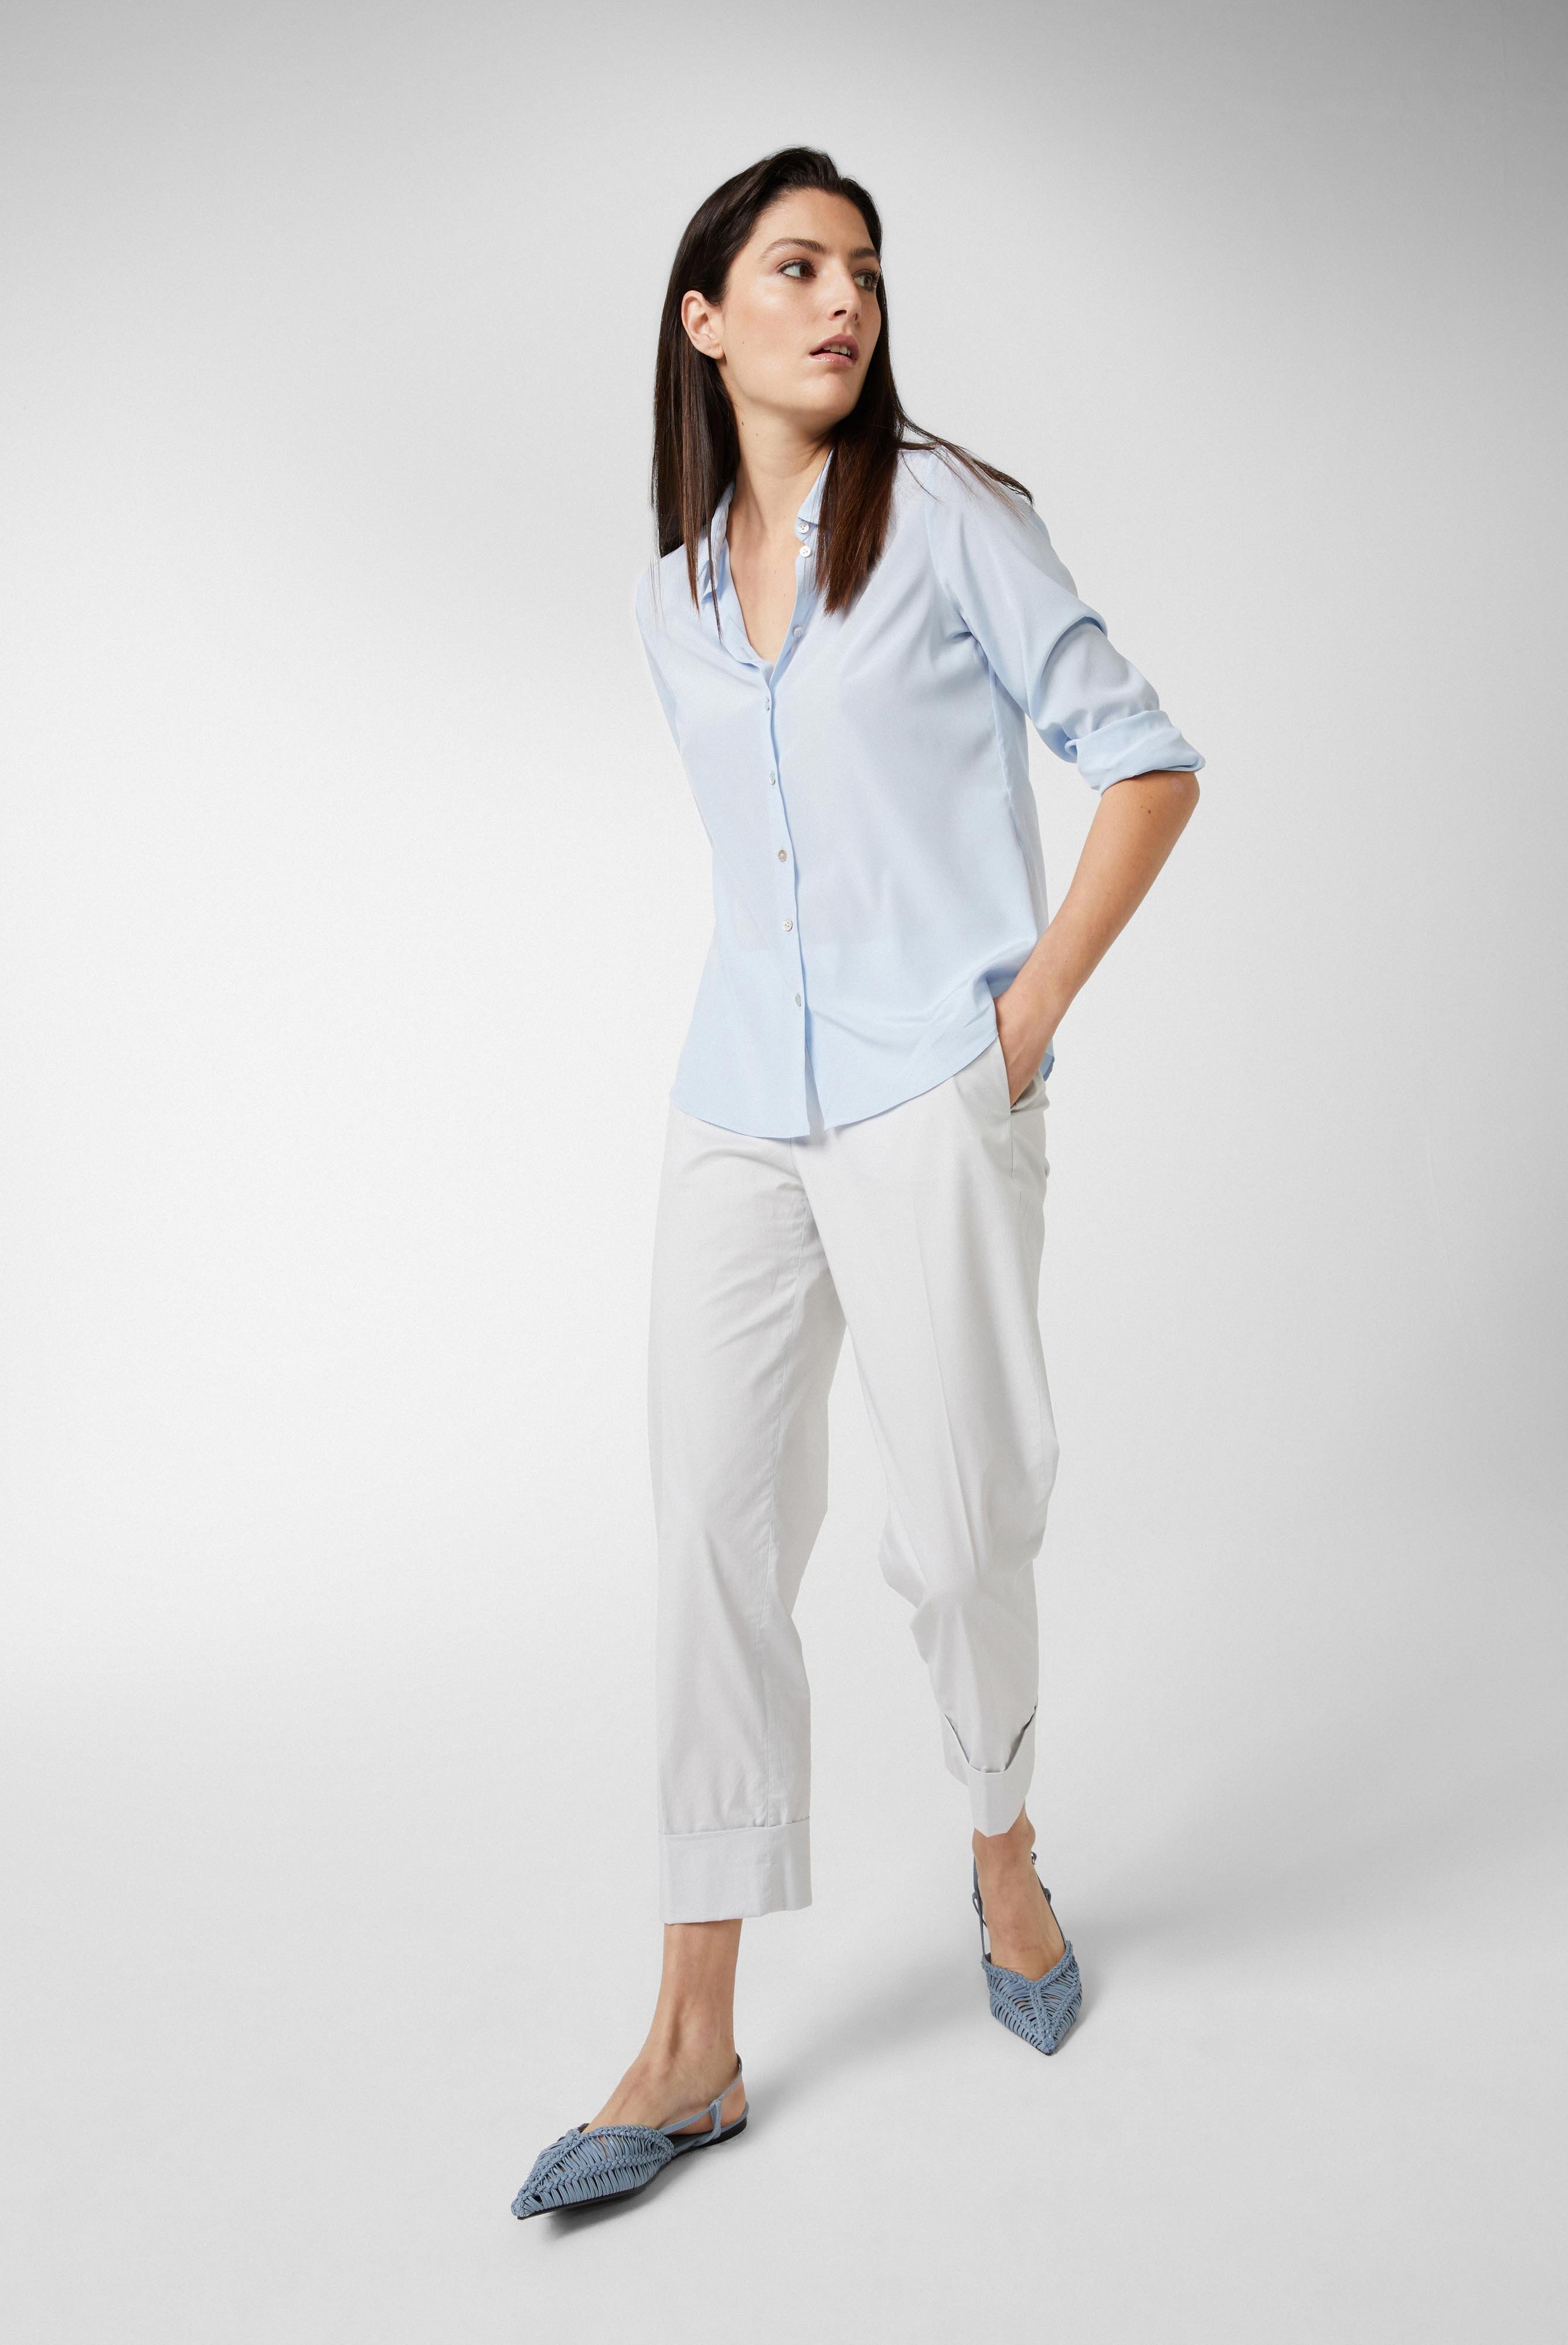 Business Blouses+Shirt with silk and stretch+05.511Z.07.155553.713.44